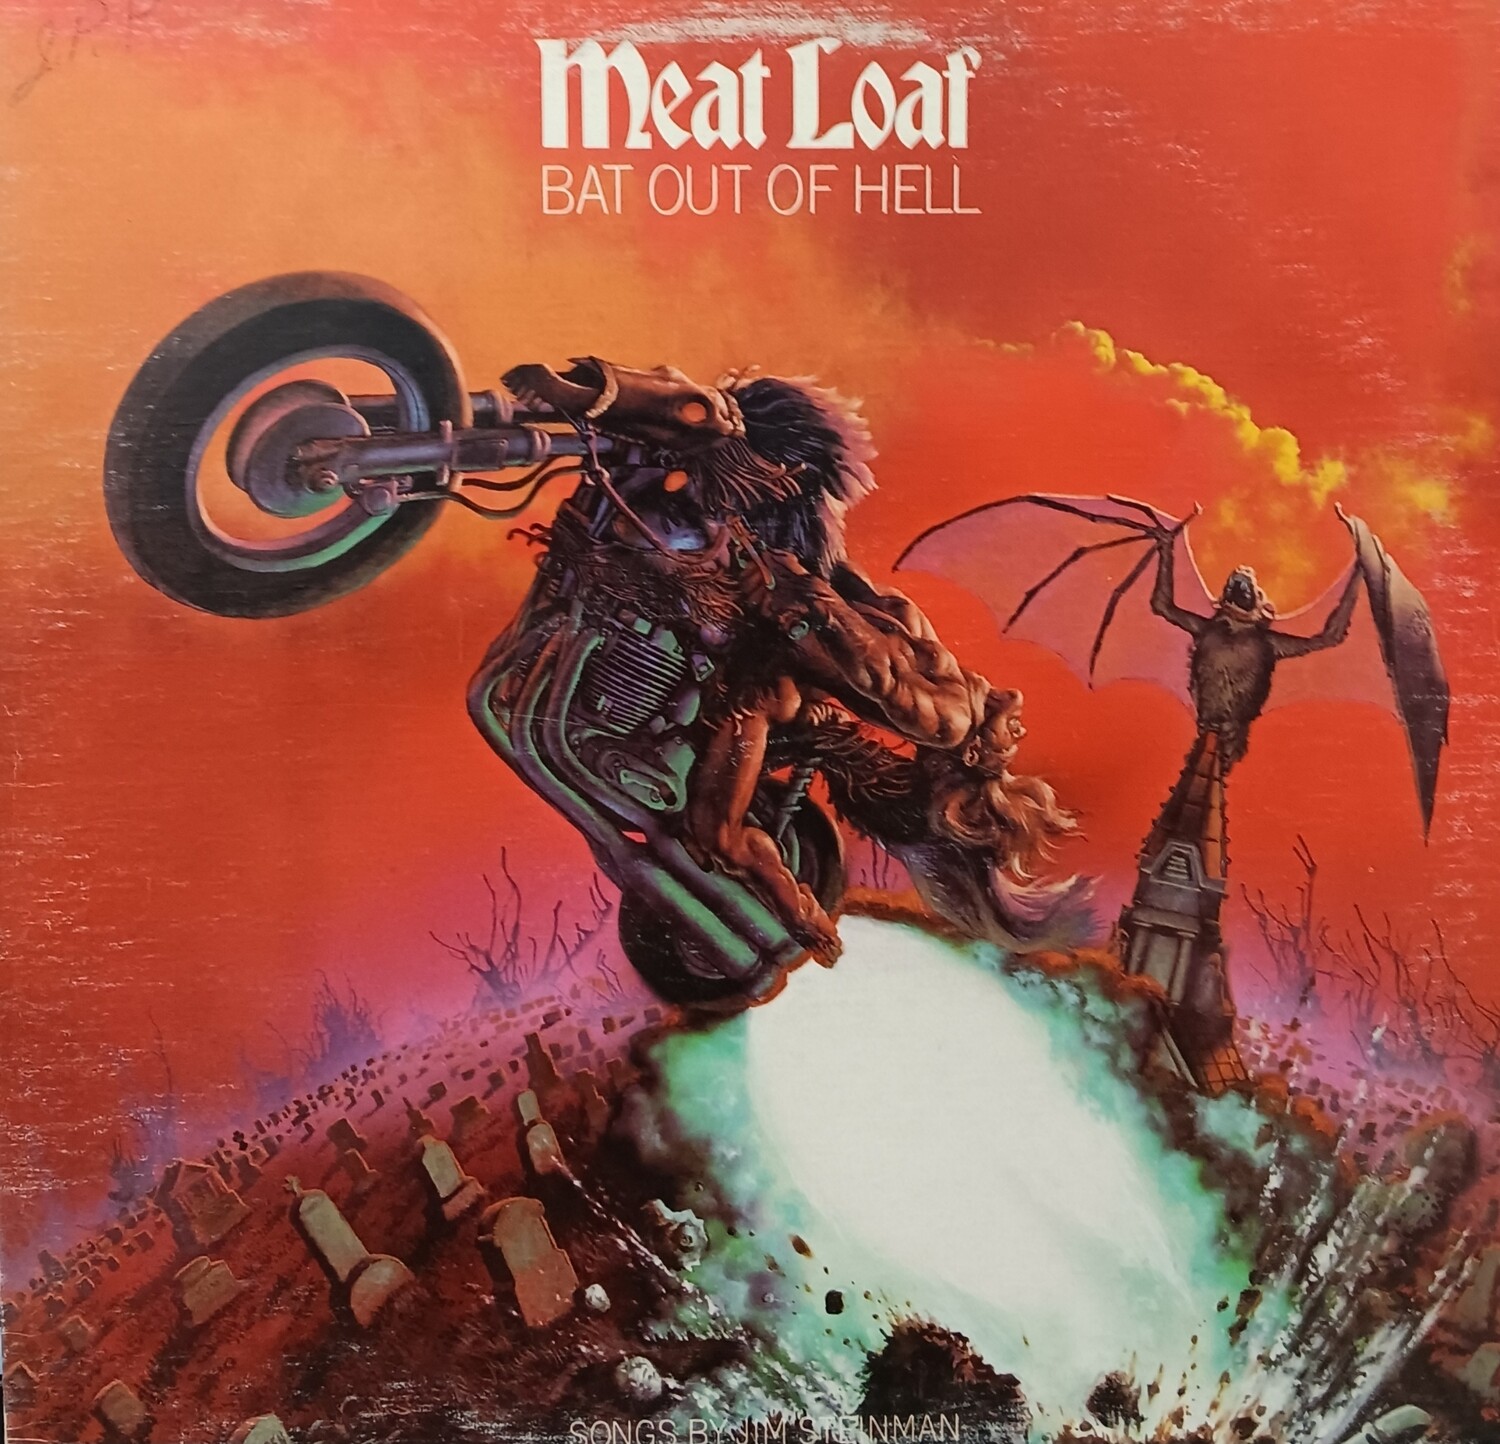 MEAT LOAF - Bat out of hell